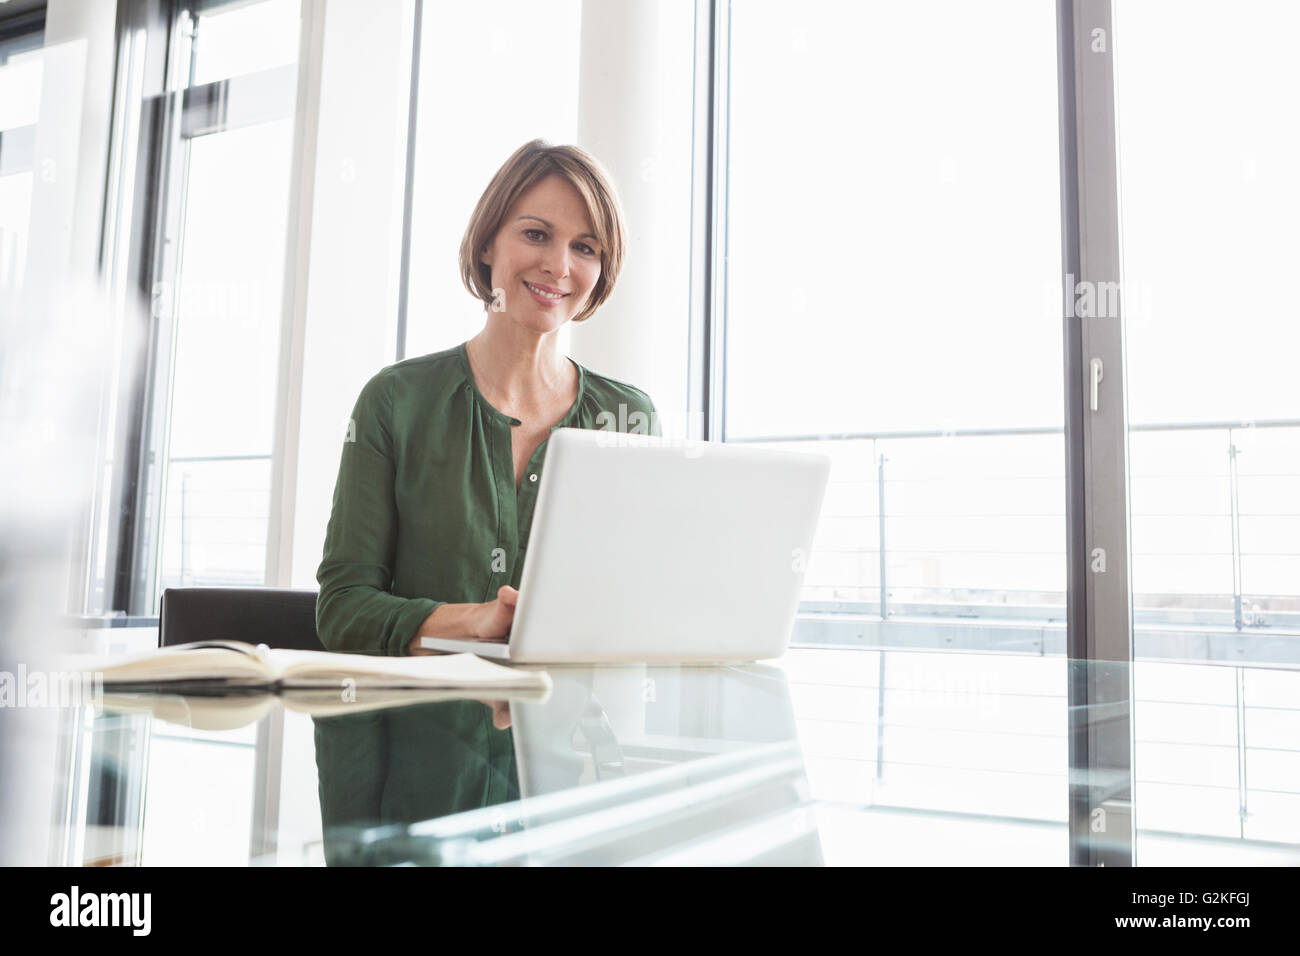 Portrait of smiling businesswoman working on laptop at office desk Stock Photo